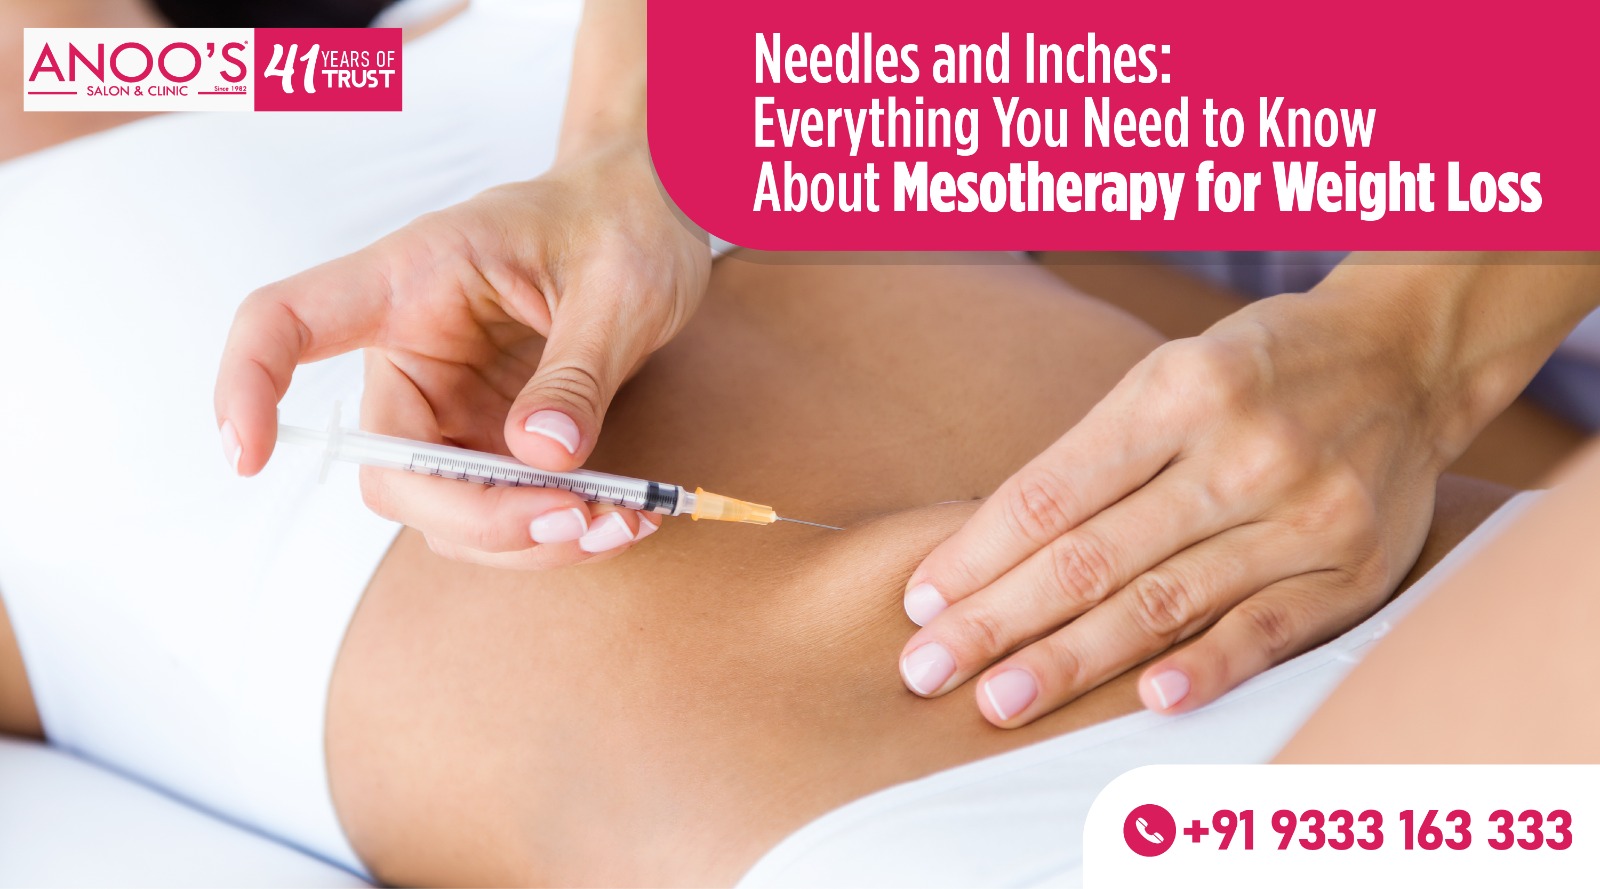 Needles and Inches: Everything You Need to Know About Mesotherapy for Weight Loss